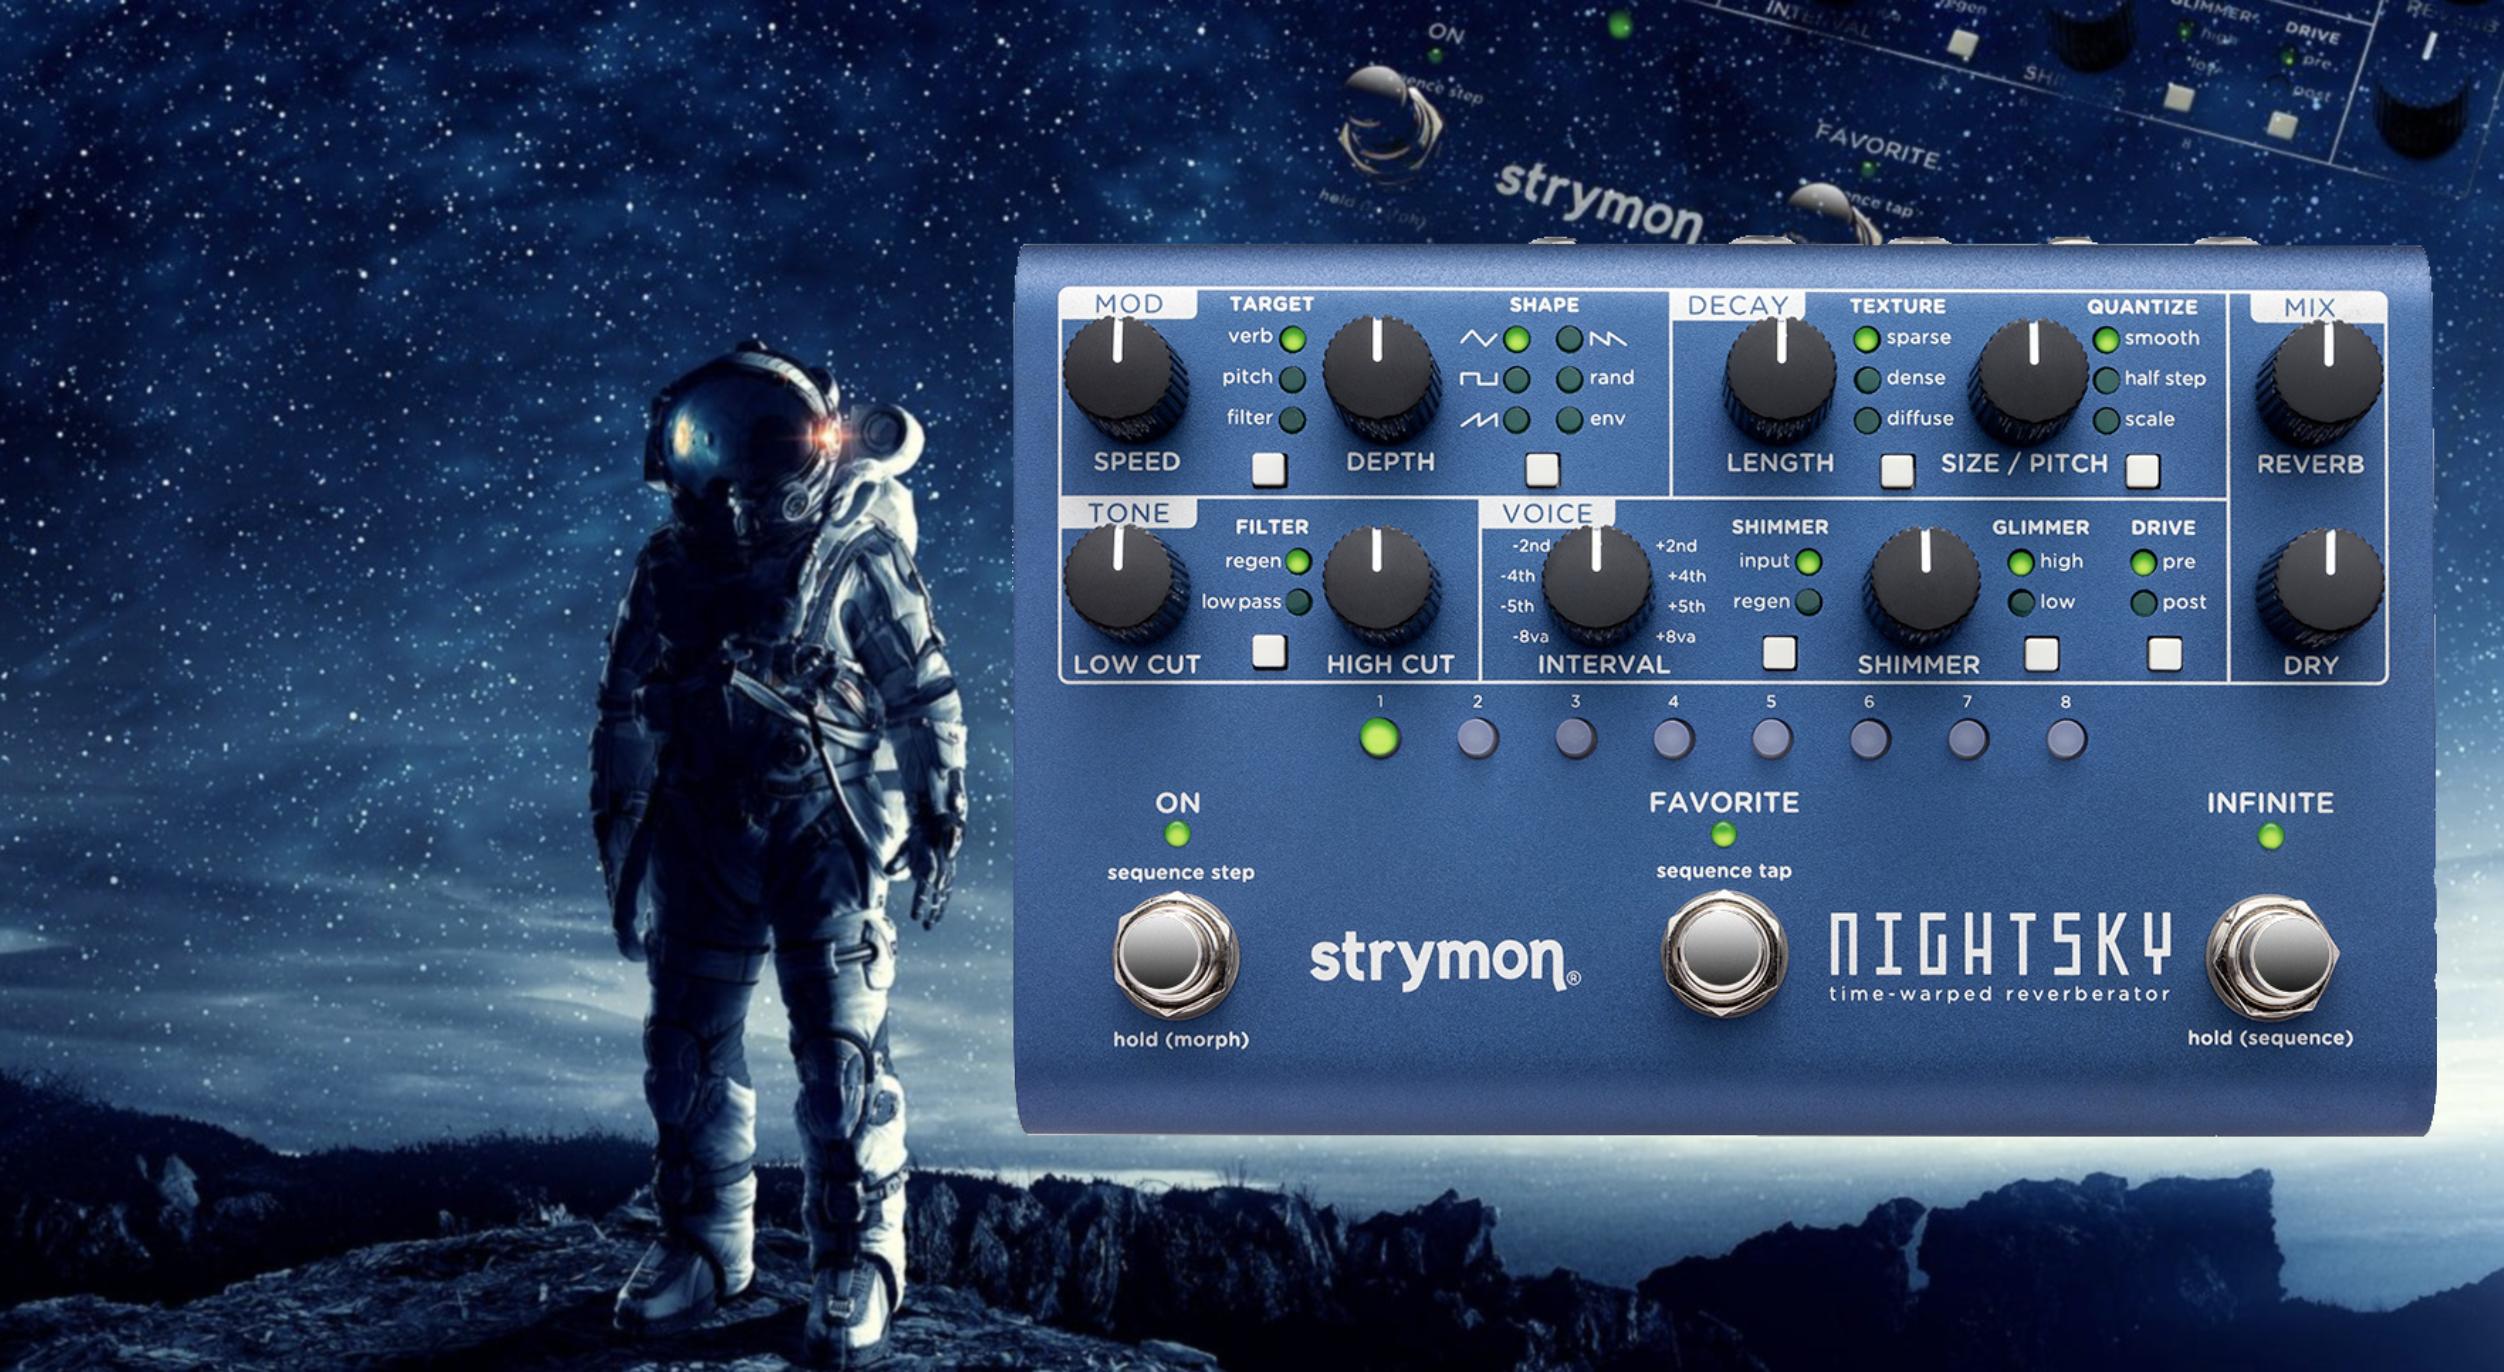 Strymon NightSky, A Sequencing Reverb For Undiscovered Sound